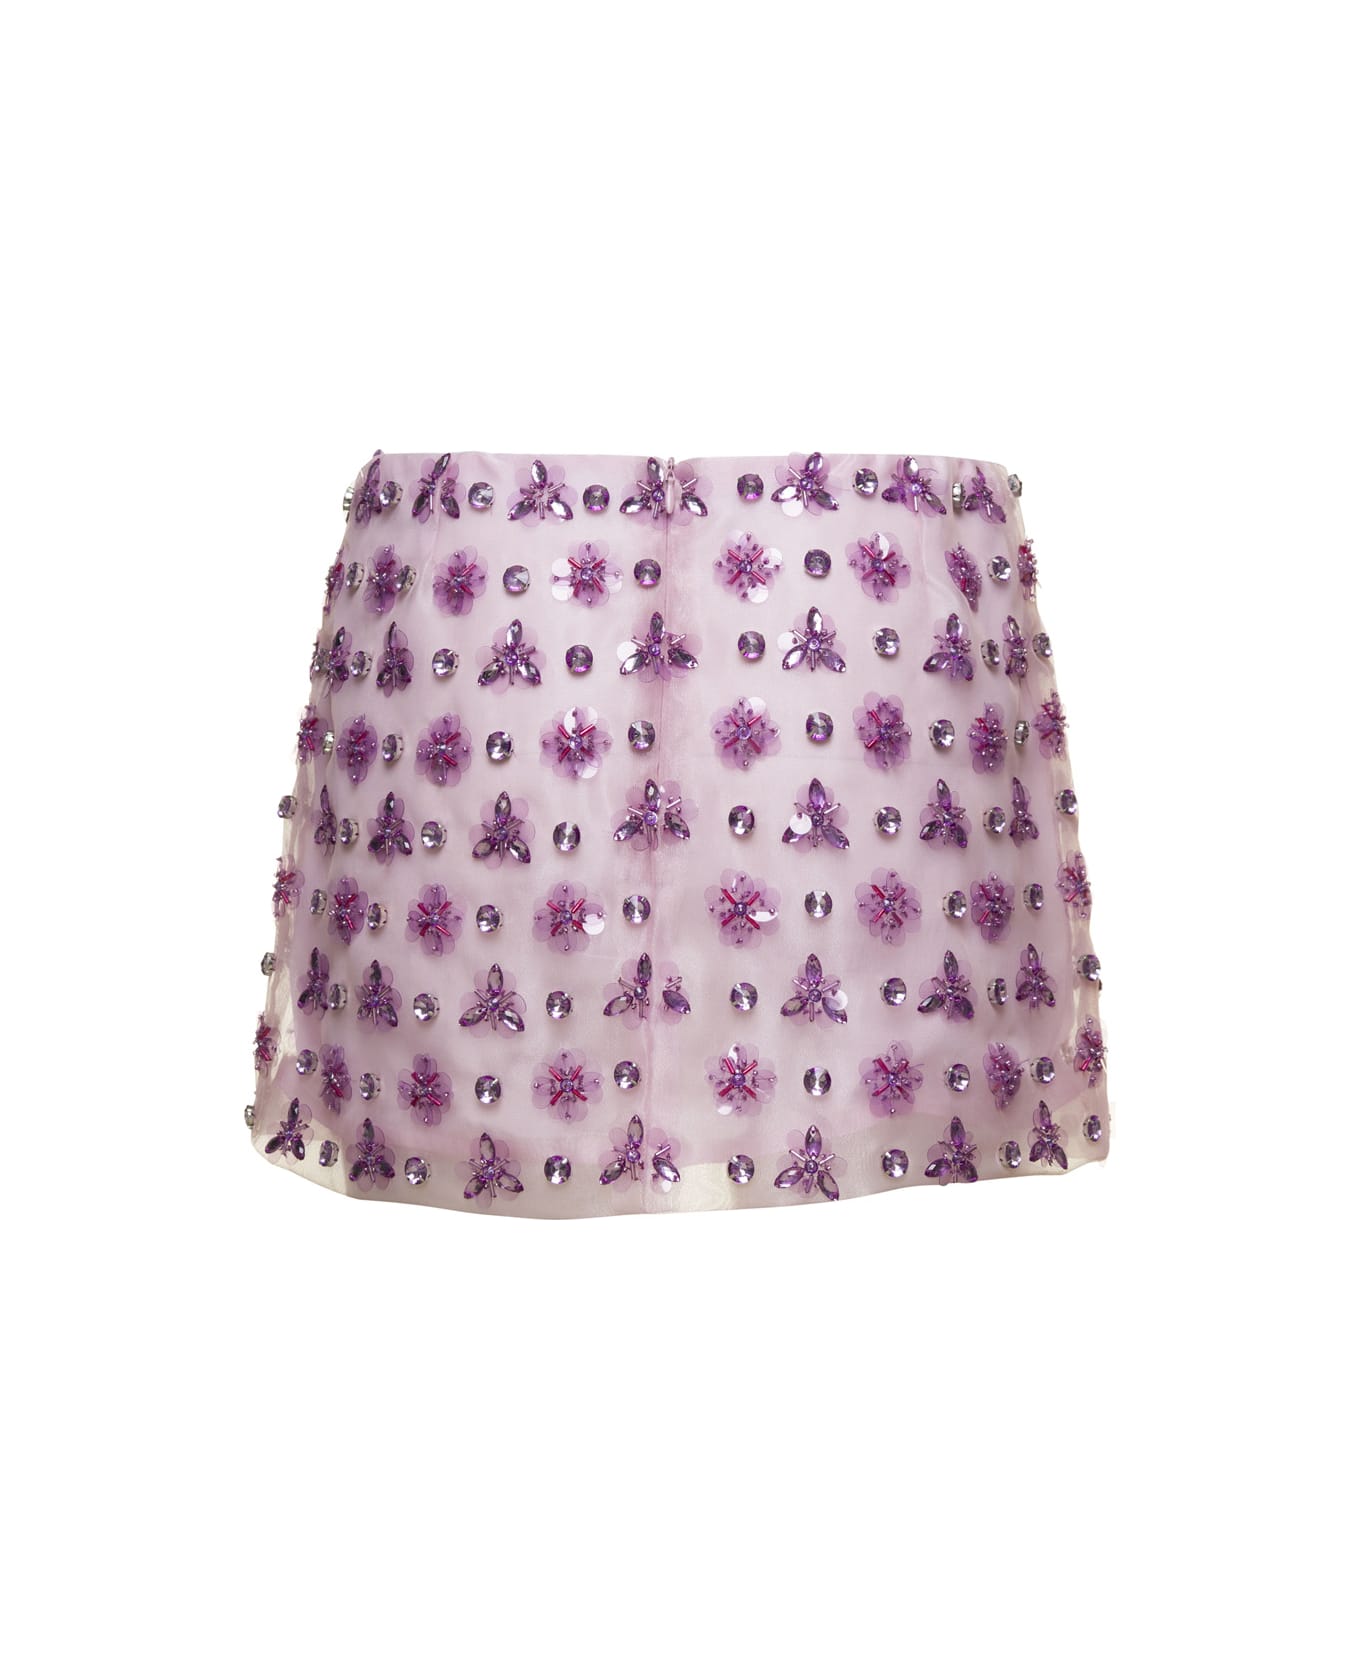 Des Phemmes Pink Geometric Mini Skirt With Crystal Embellishment In Organza Woman - Violet スカート